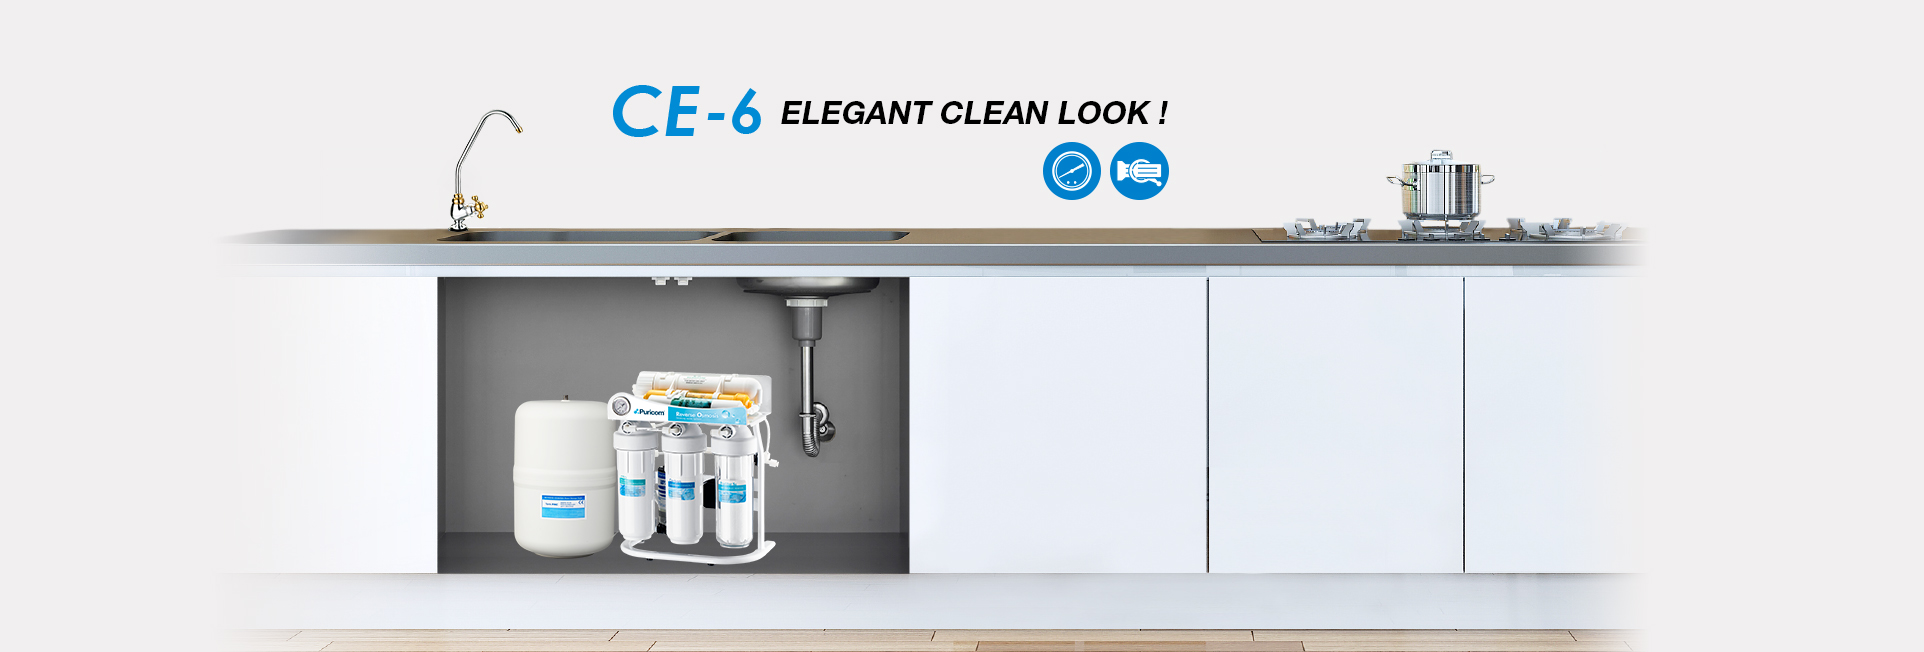 Elegant CE-6 Traditional RO Water Filter - Puricom